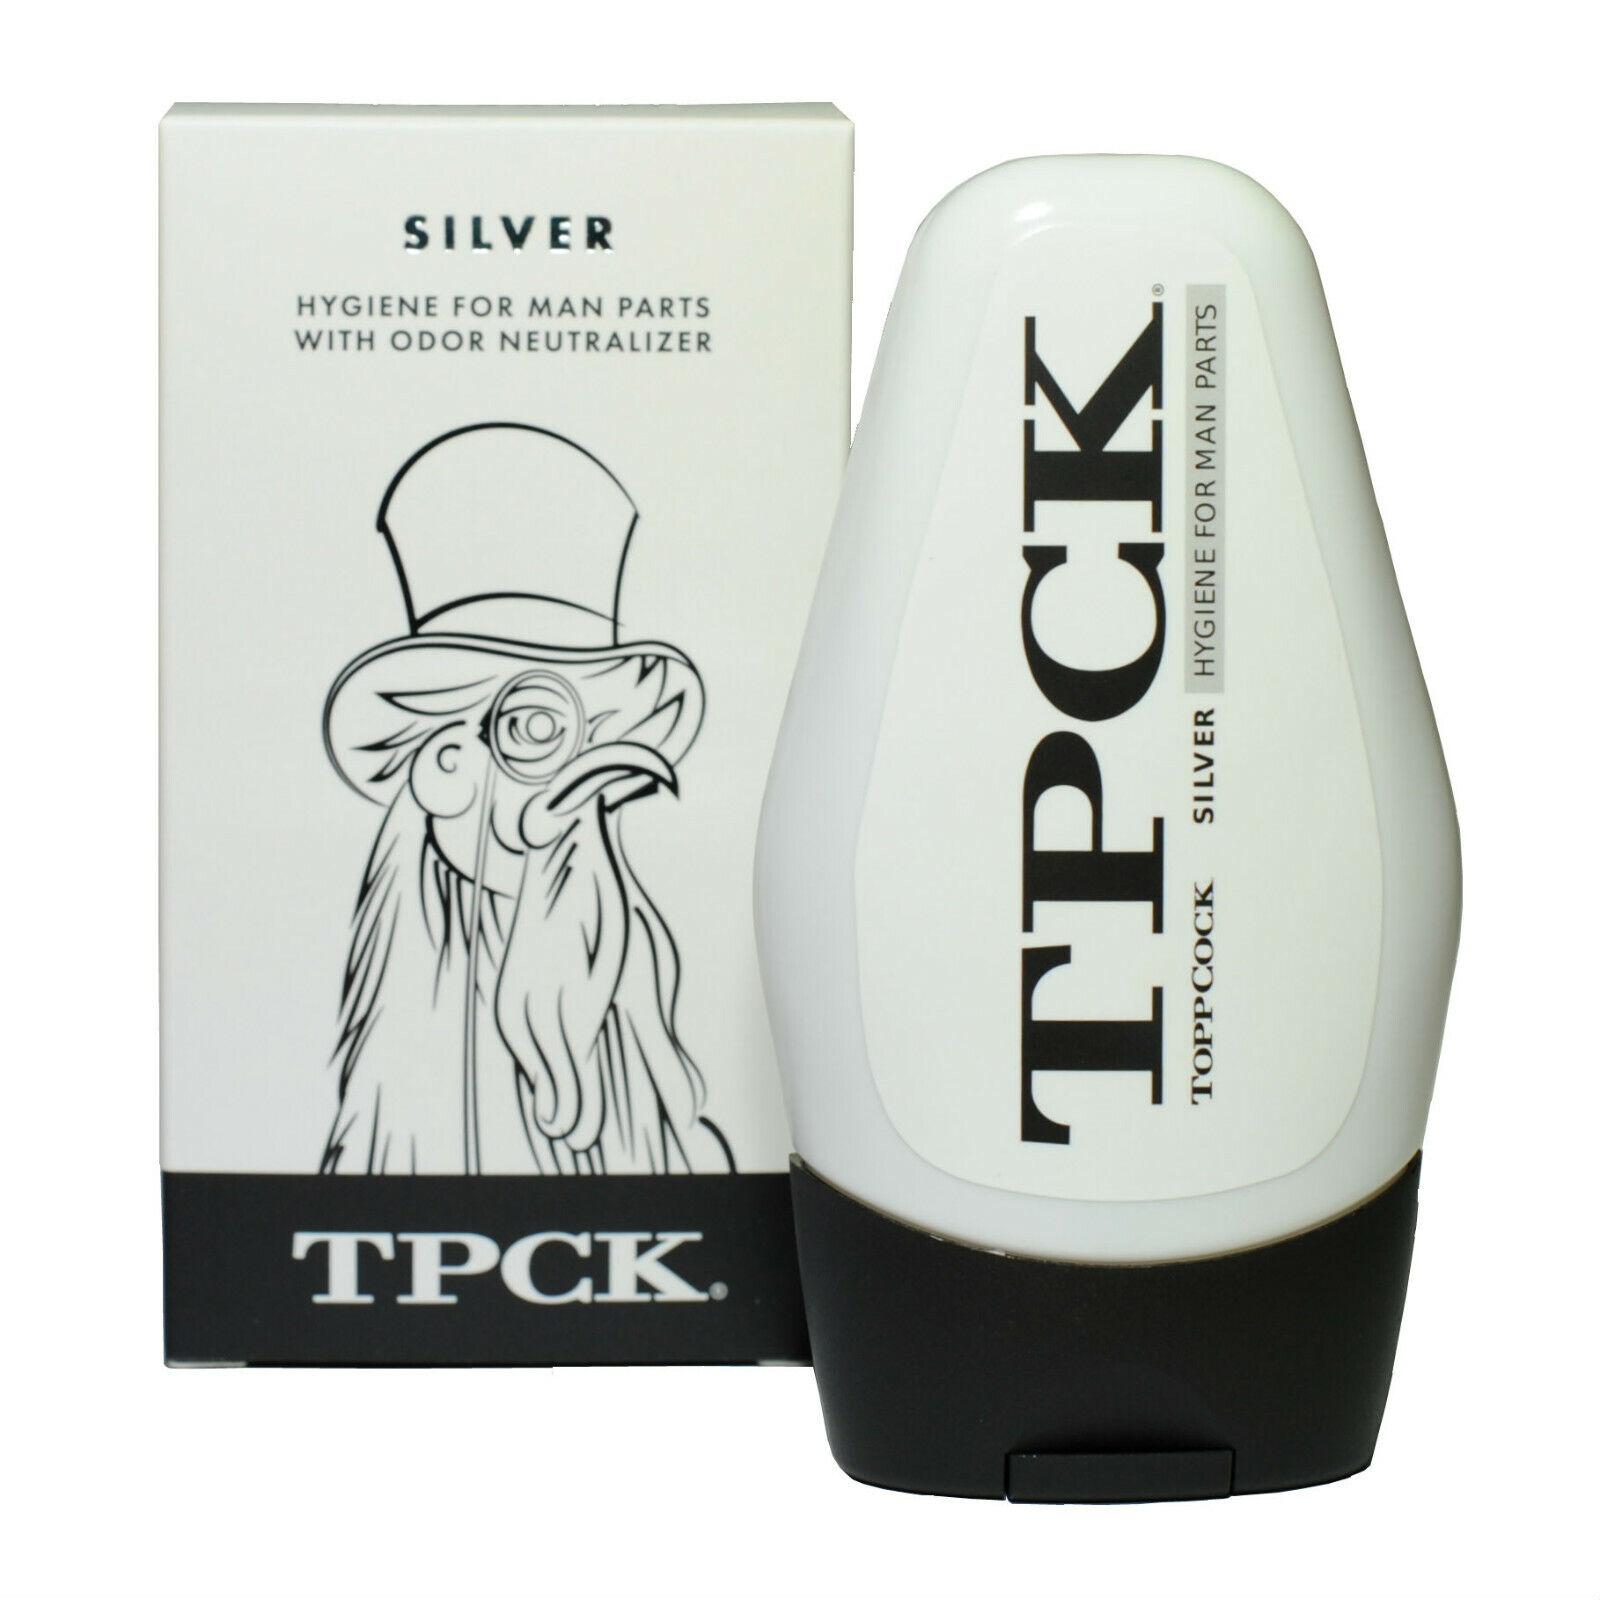 TPCK ToppCock Silver Hygiene for Man Parts with Odor Neutralizer